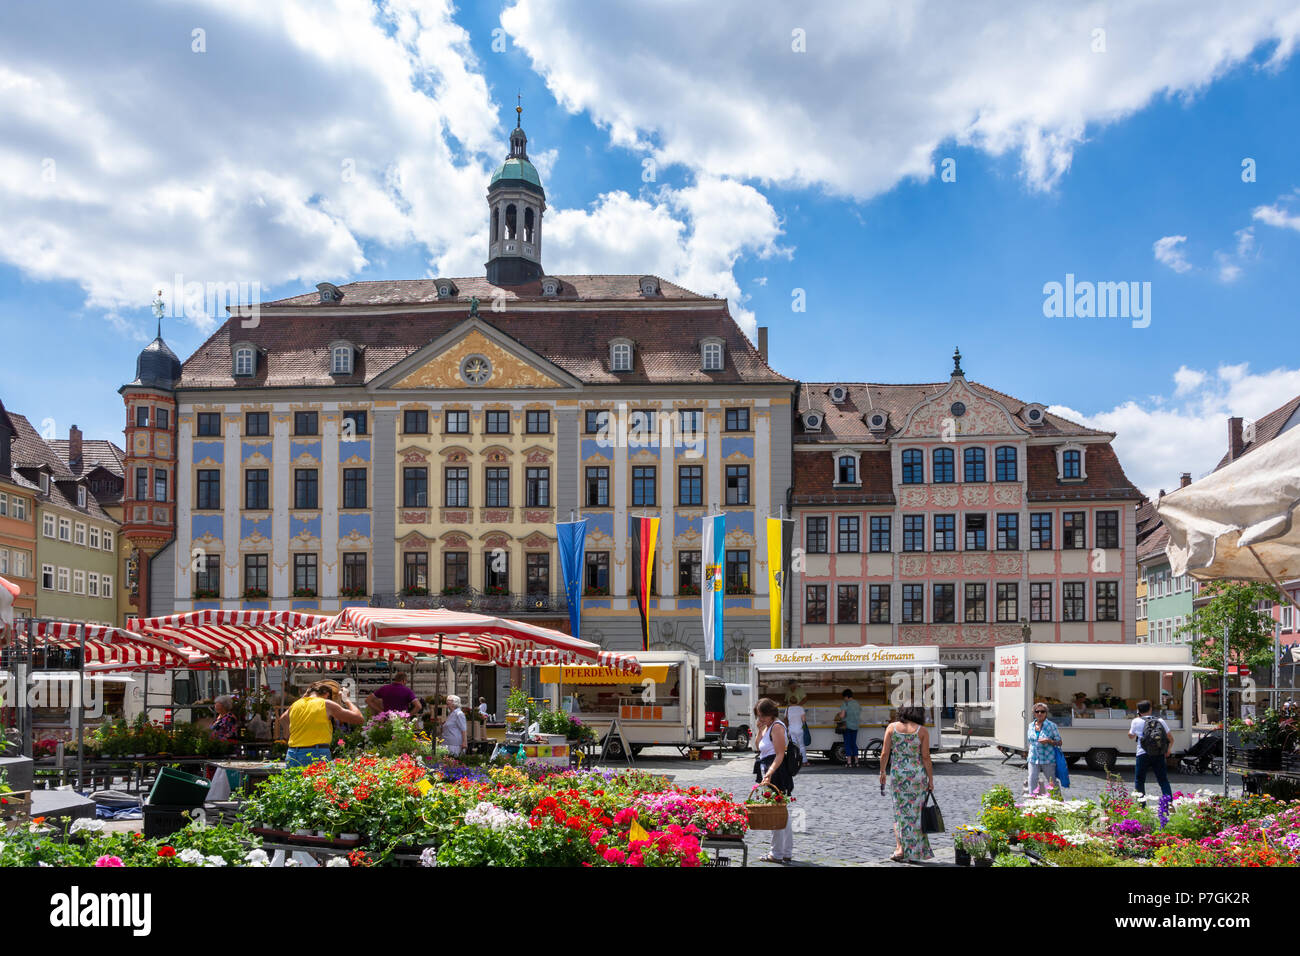 COBURG, GERMANY - JUNE 20: People the historic marketplace of Coburg, Germany on June 20, 2018. Stock Photo